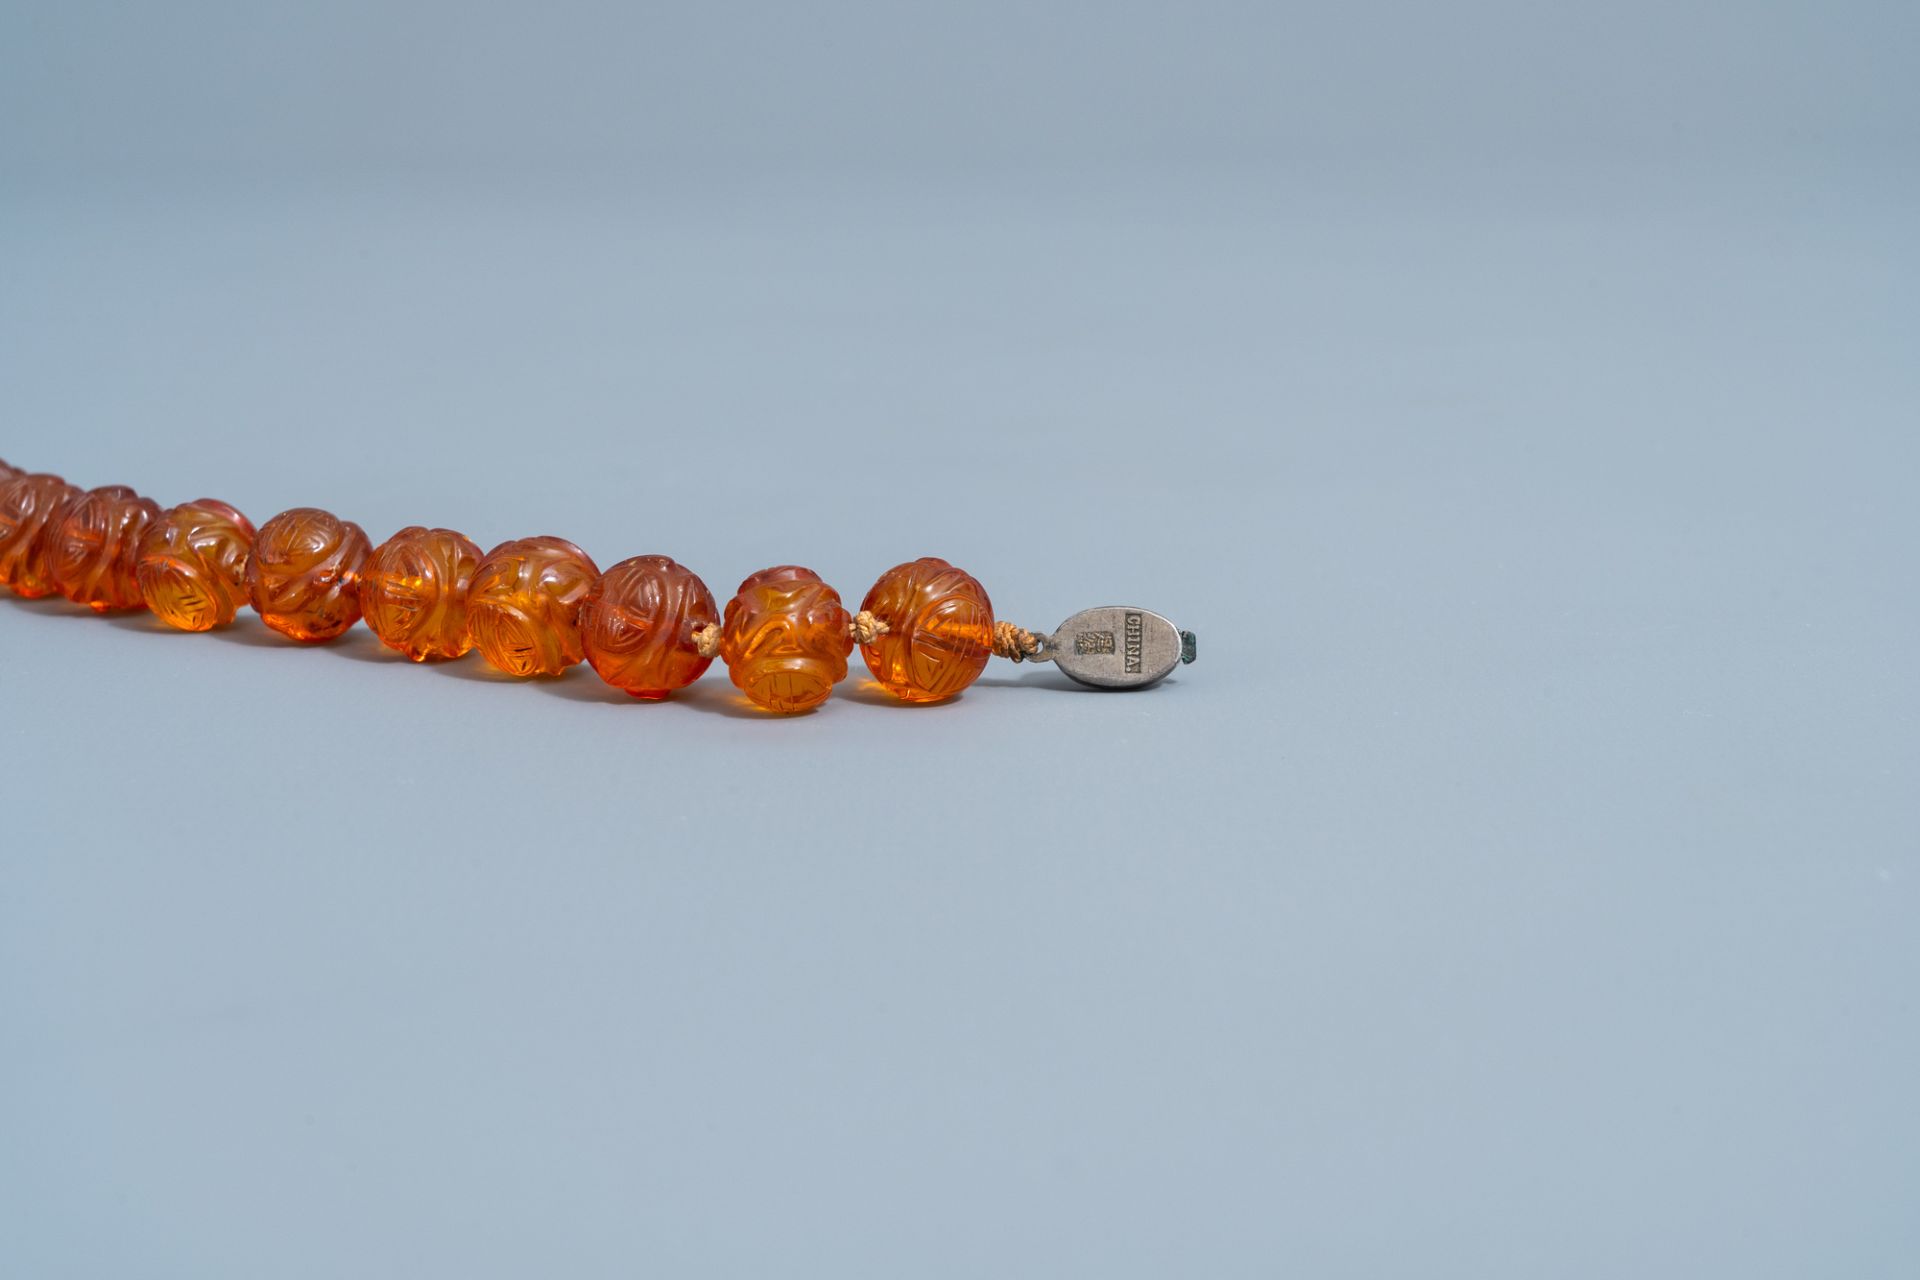 A Chinese necklace with translucent amber beads, 20th C. - Image 3 of 4